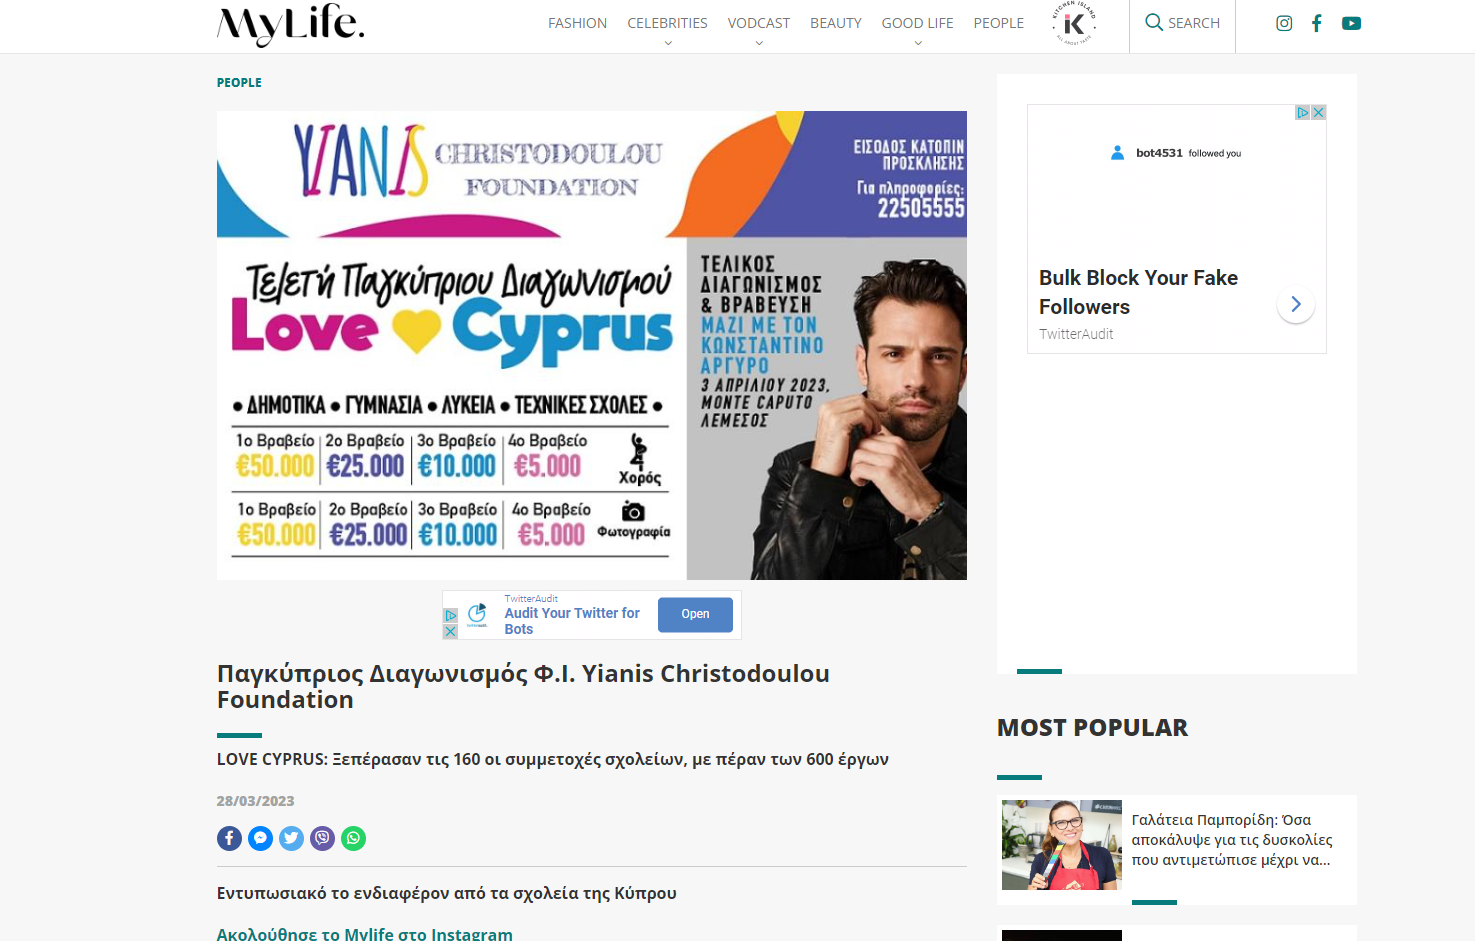 My Life Reports On The Entries For The ‘Love Cyprus’ Competition